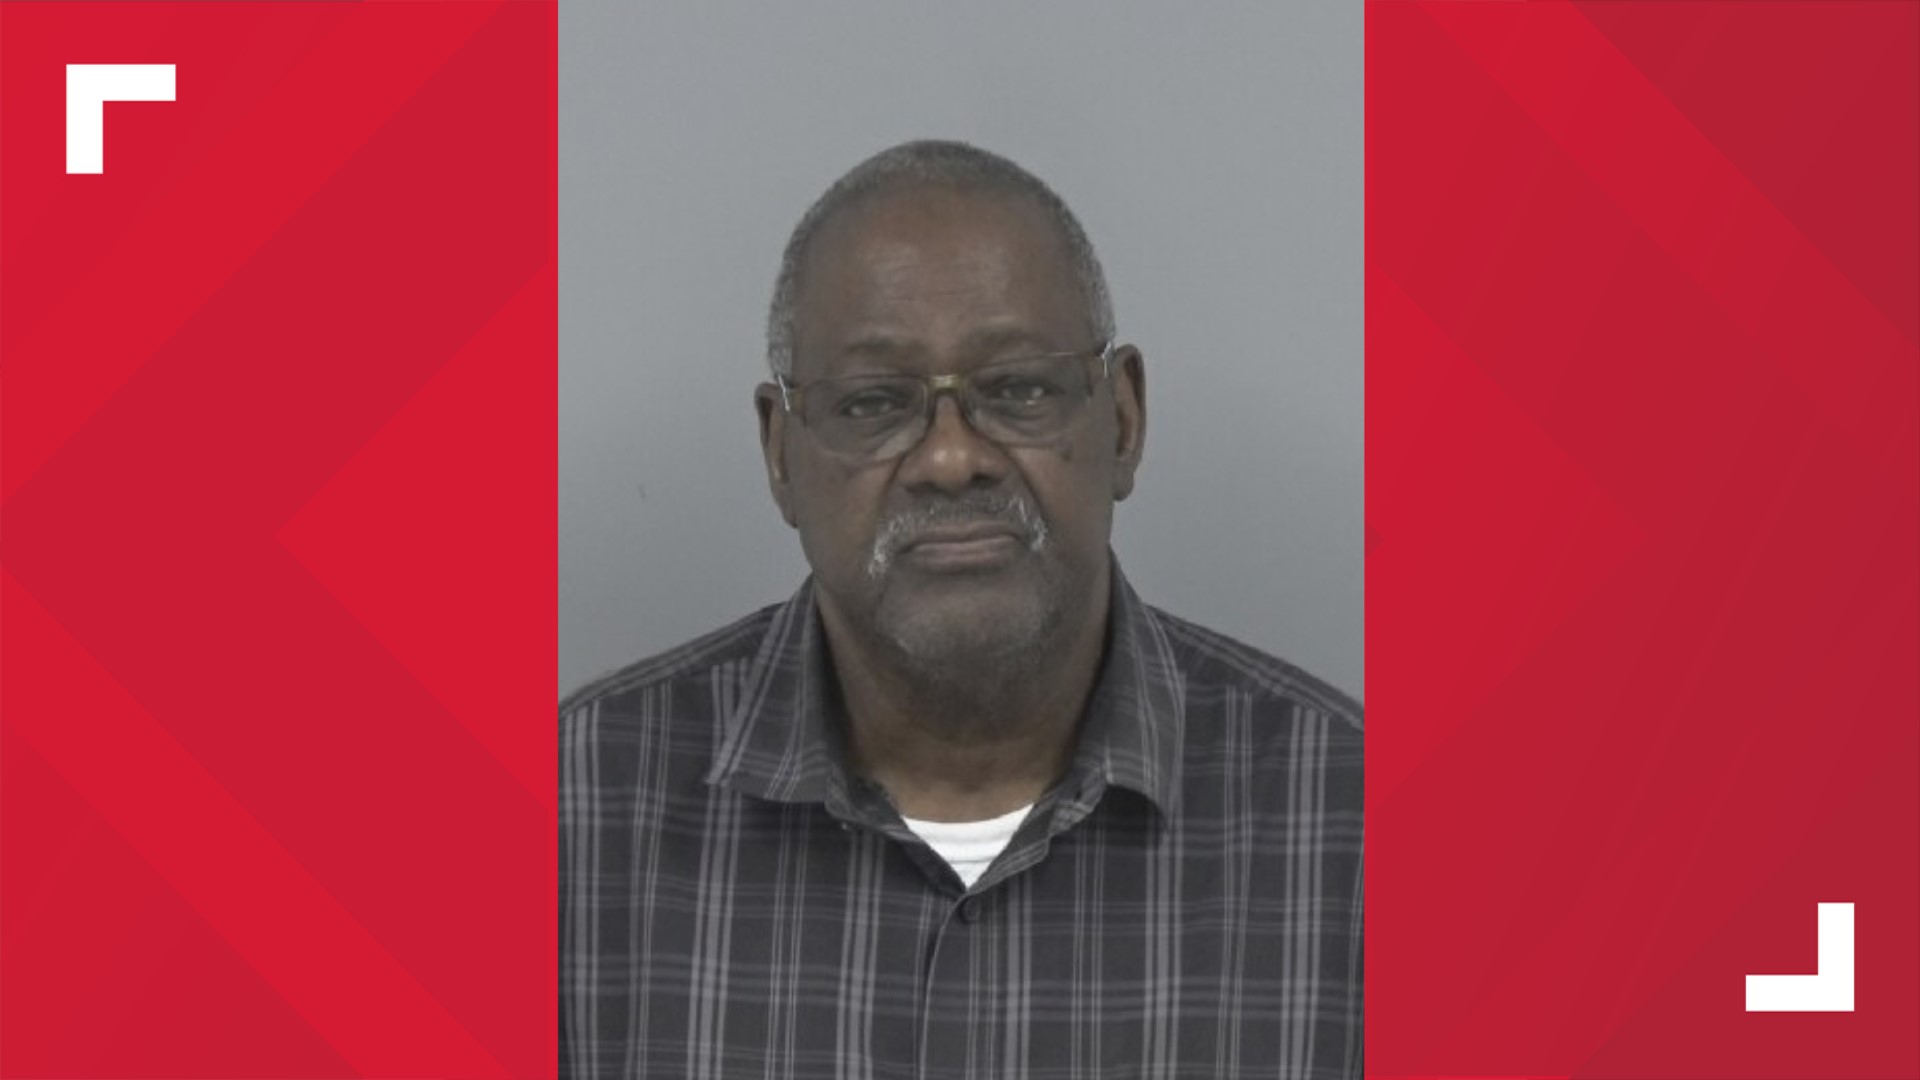 Jerry Philips, 69, is accused of murdering Valerie Ames, 31; her body was found on Aug. 10, 1996, inside of the Courtyard Apartments on King Street in Riverside.